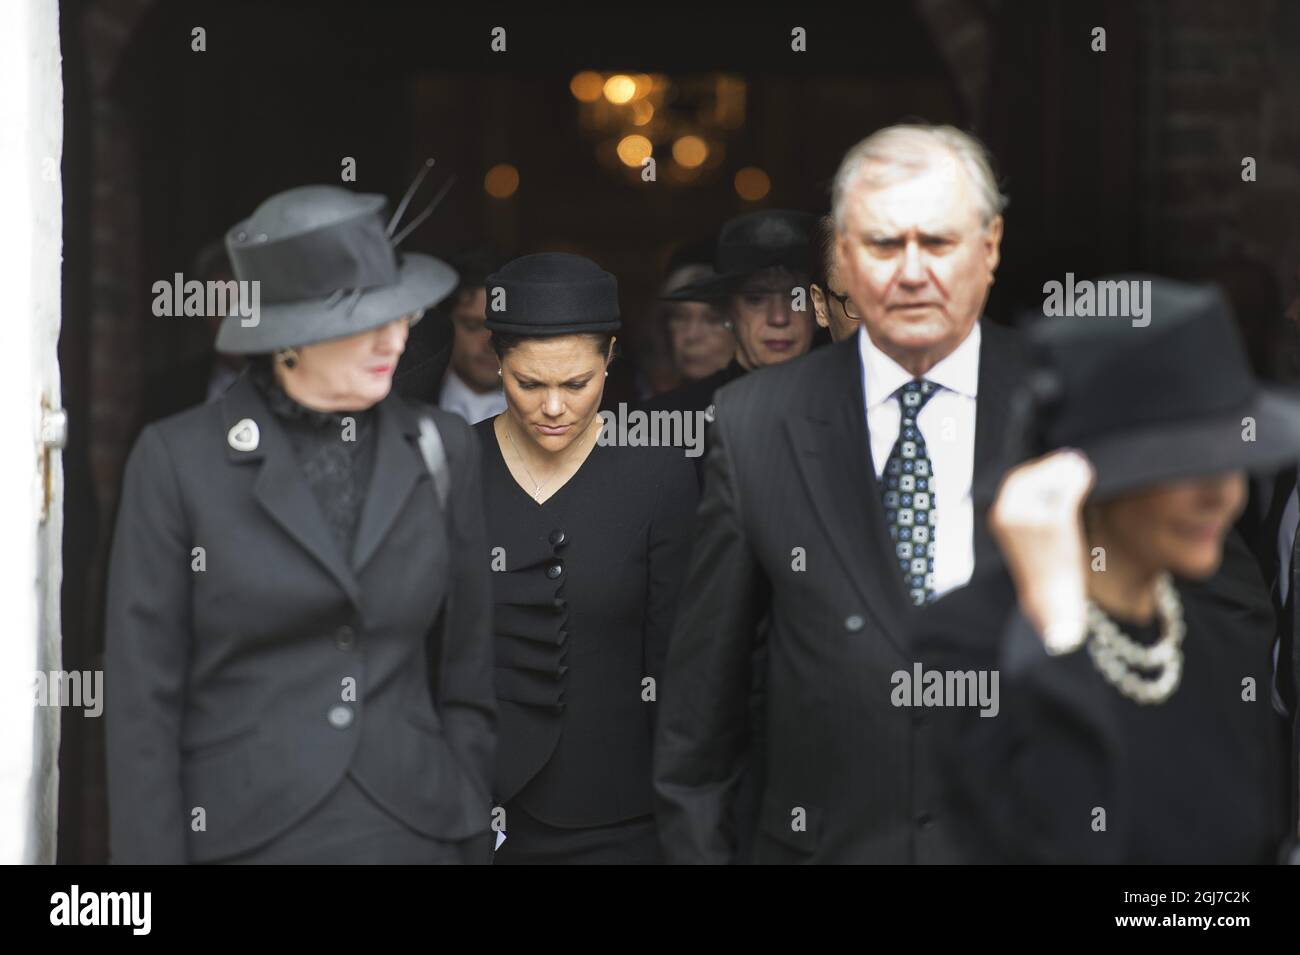 BASTAD 2012-05-14 Crown Princess Victoria is seen between Queen Margreth and Prince Consort Henrik of Denmark during the funeral of Count Carl Johan Bernadotte in the Maria Church in Bastad, Sweden, May 14, 2012. Foto: Suvad Mrkonjic / XP / SCANPIX / kod 7116 ** OUT SWEDEN OUT T ** Stock Photo